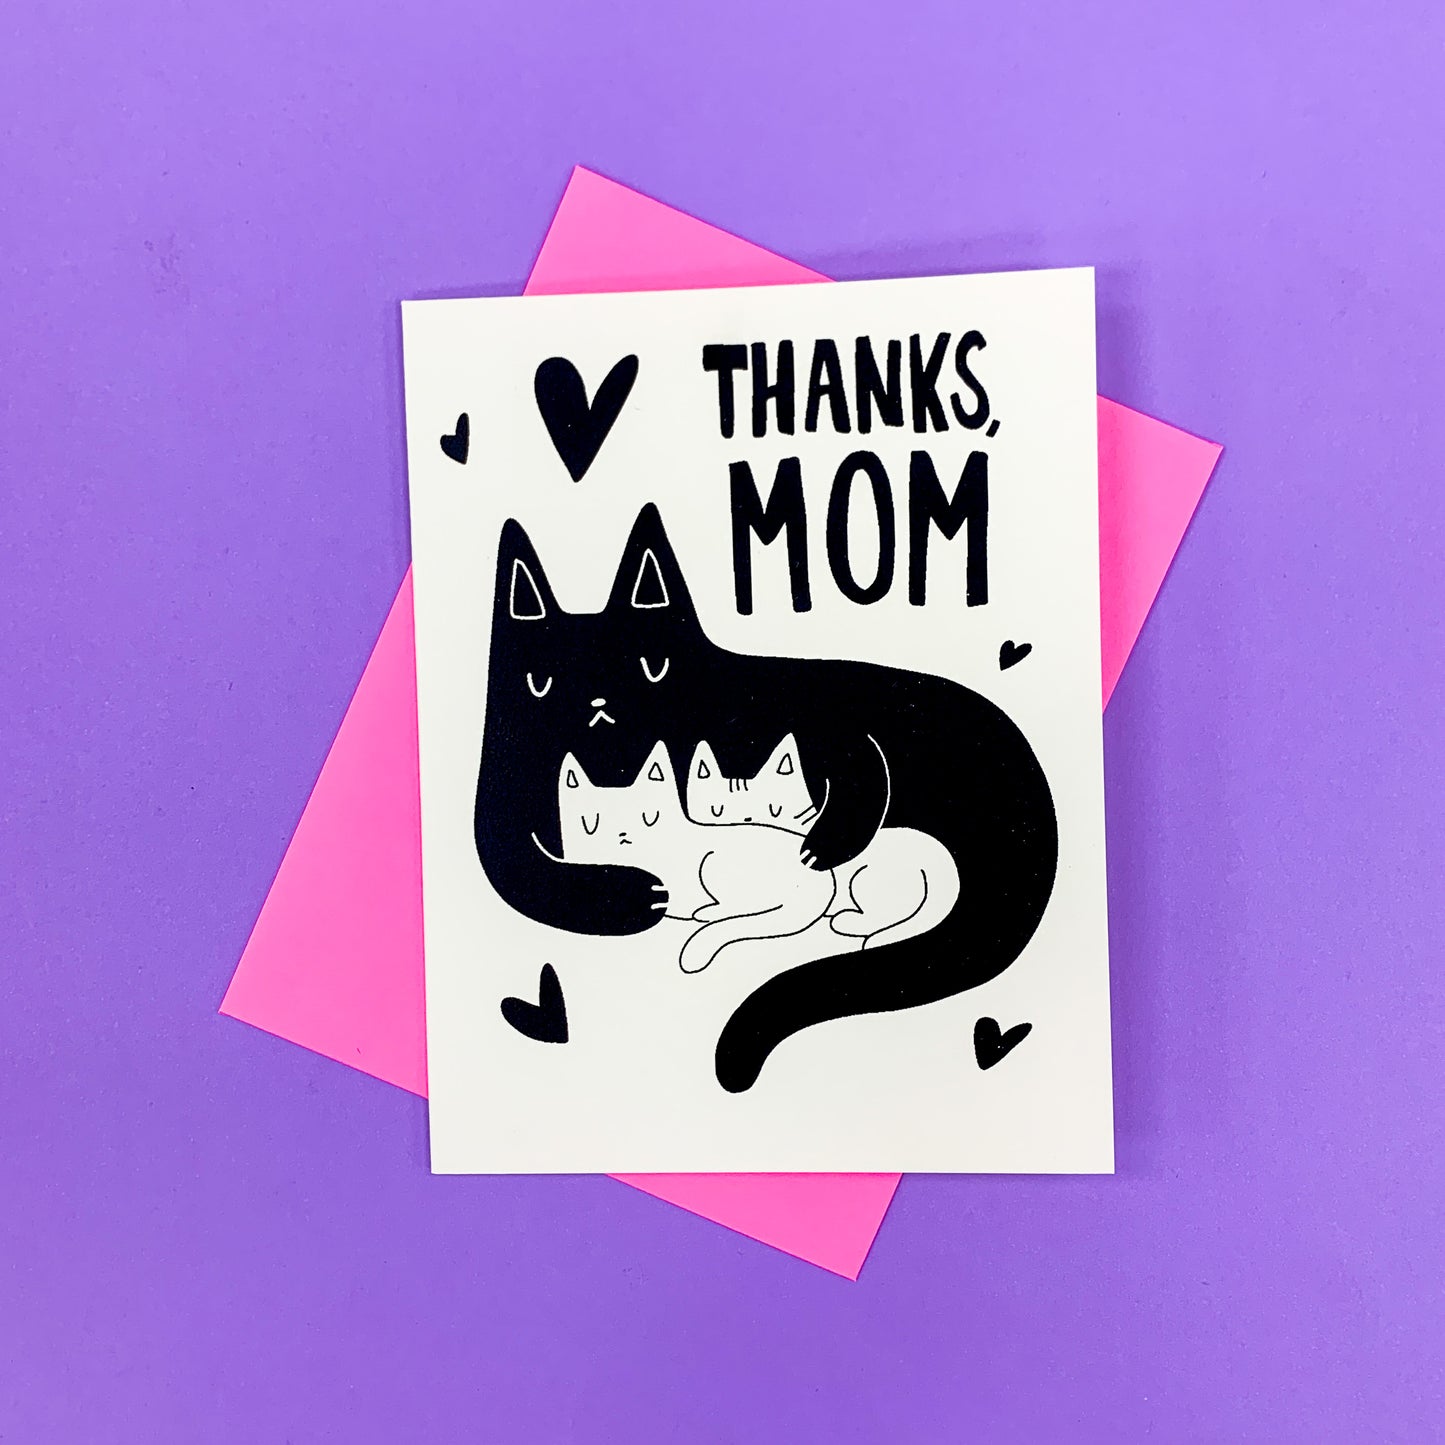 Thanks, Mom Mother's Day Greeting Card